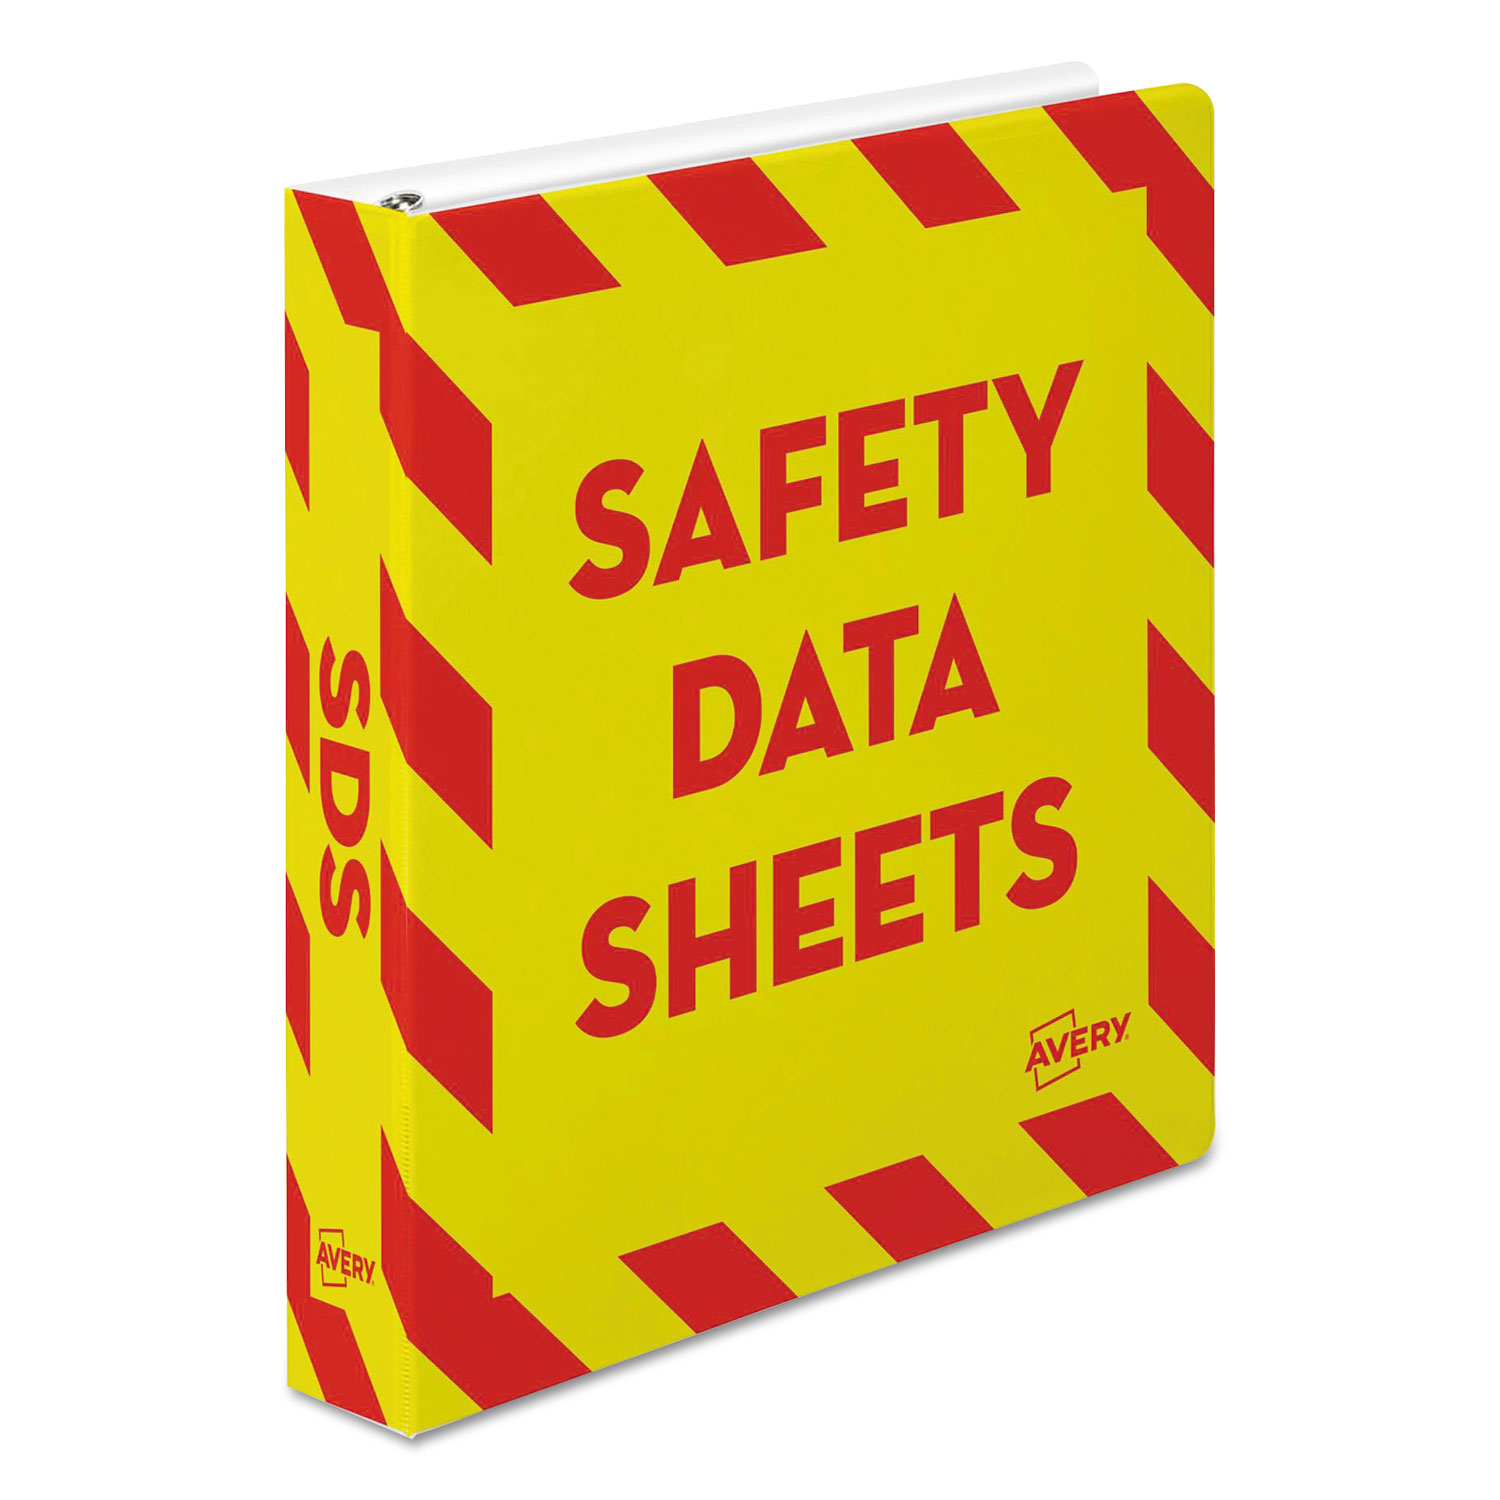  Avery 18950 Heavy-Duty Preprinted Safety Data Sheet Binder, 3 Rings, 1.5 Capacity, 11 x 8.5, Yellow/Red (AVE18950) 